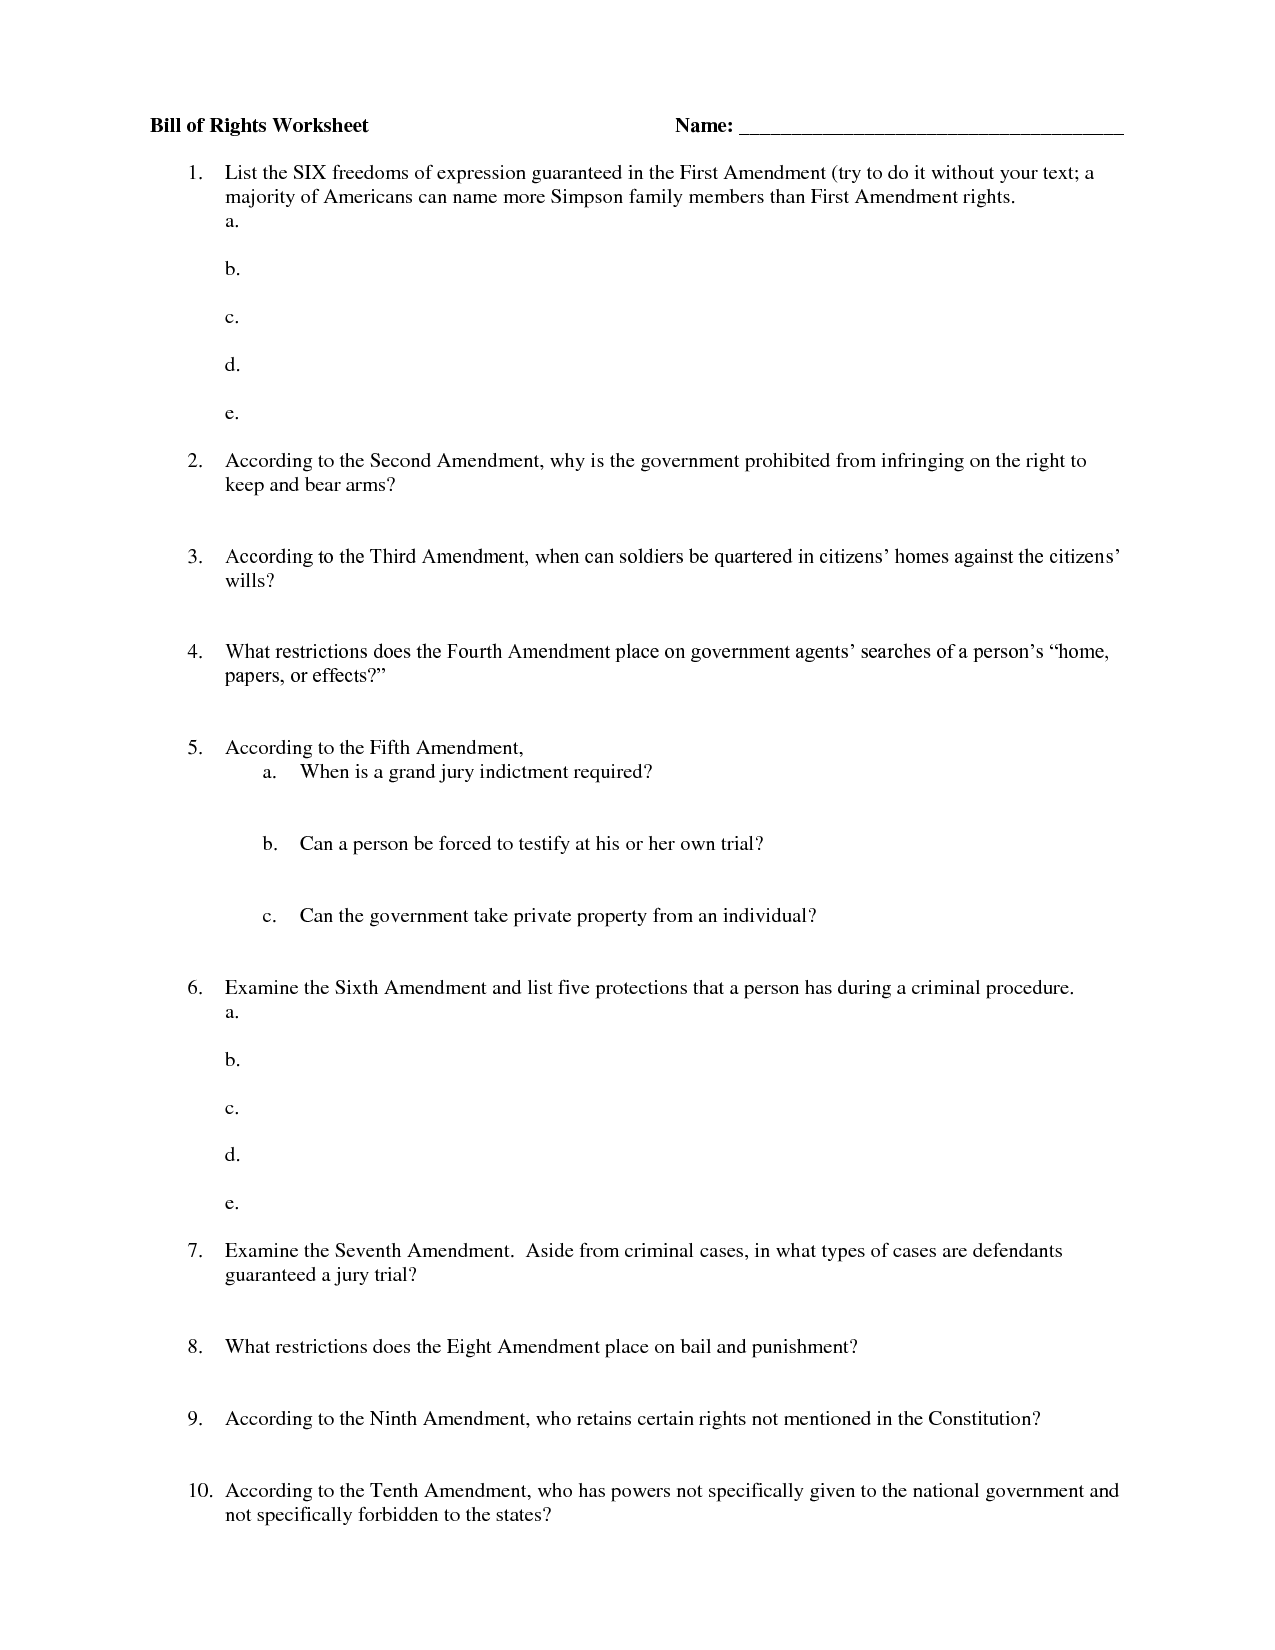 12 Best Images of The Amendments Without Meaning Worksheet 27